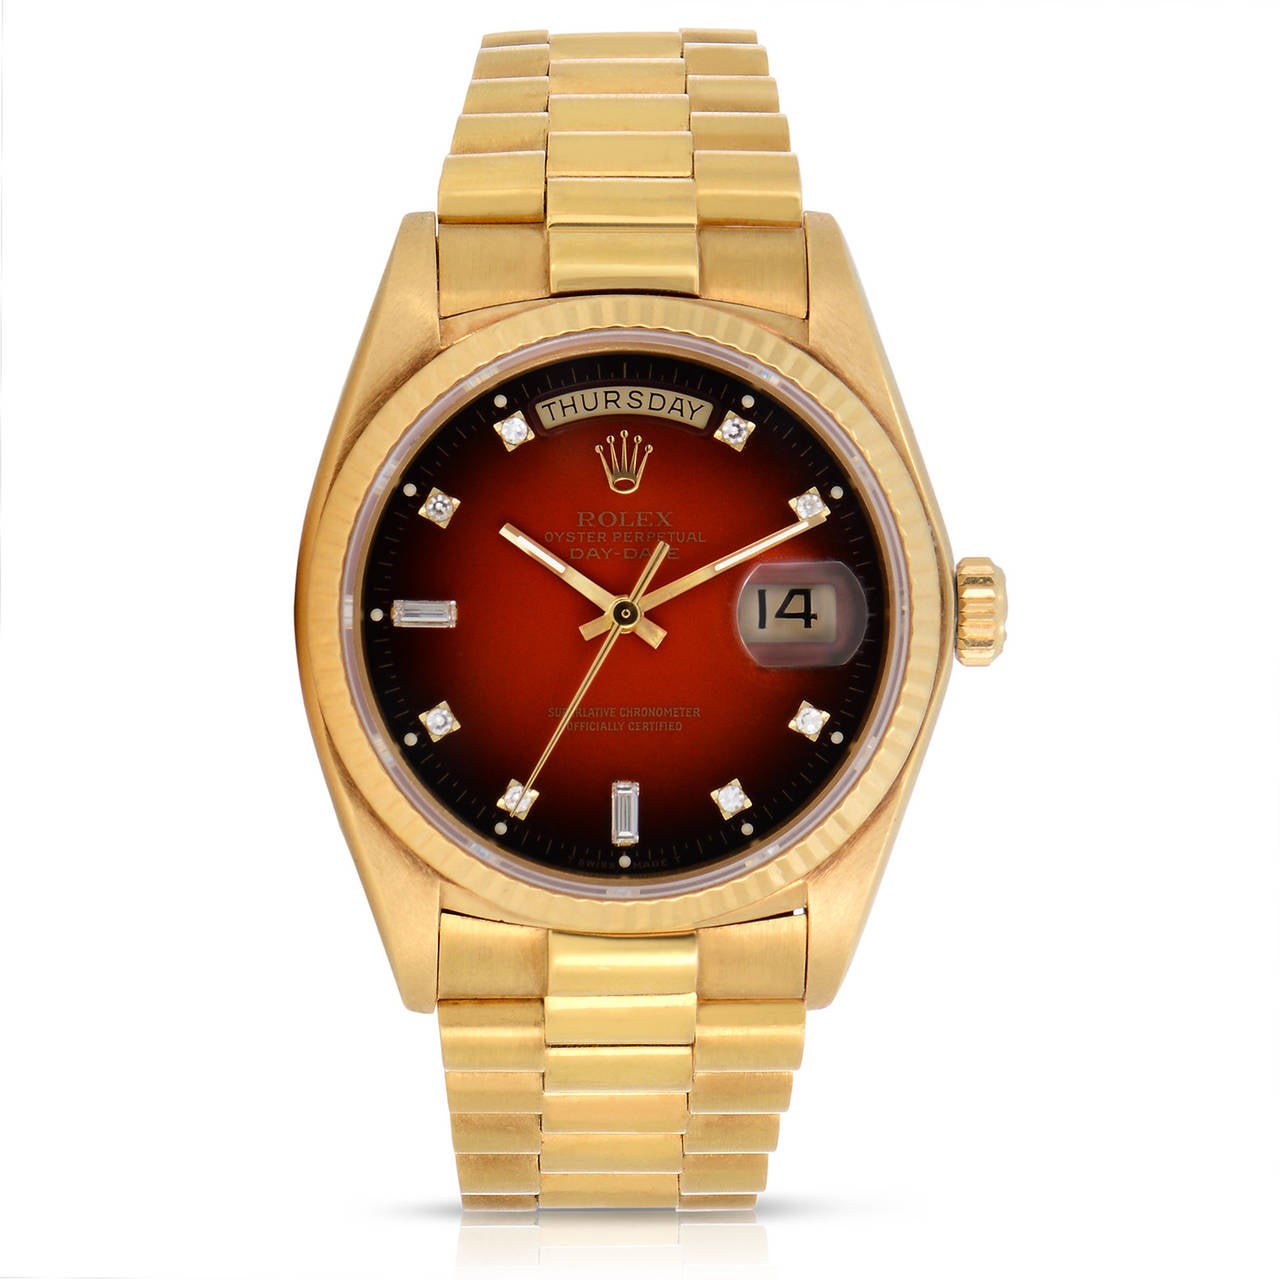 Vintage Rolex 18K Yellow Gold Oyster Perpetual Day-Date Presidential Watch
Features a Very Rare Red Vignette Degrade Enamel Dial with Diamonds
All Factory from Rolex
Features a 36mm Solid Yellow Gold Case
Rolex Presidential 18K Yellow Gold